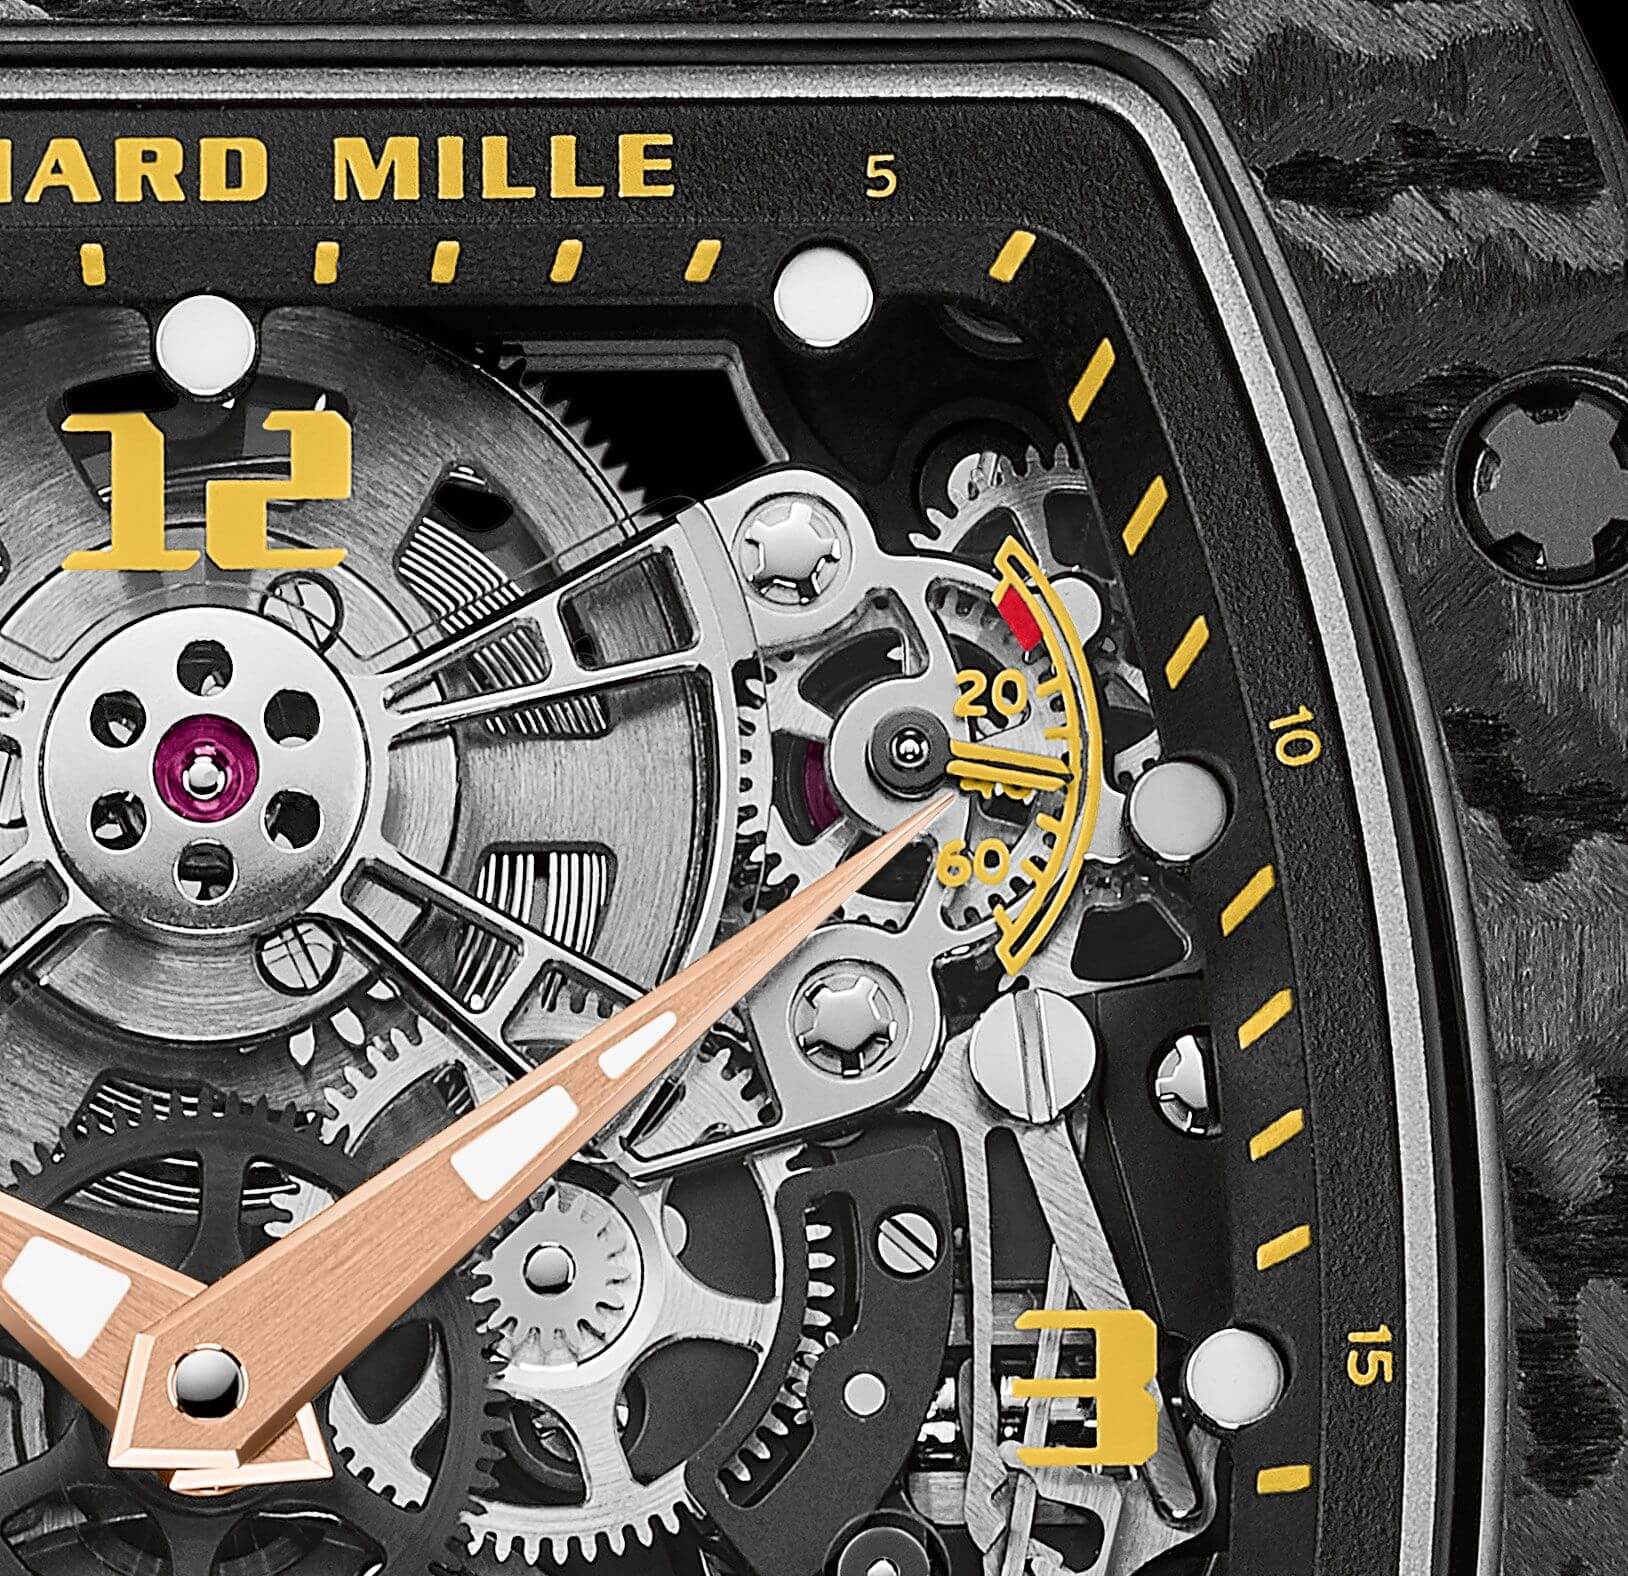 Richard Mille Nadal Mint Condition